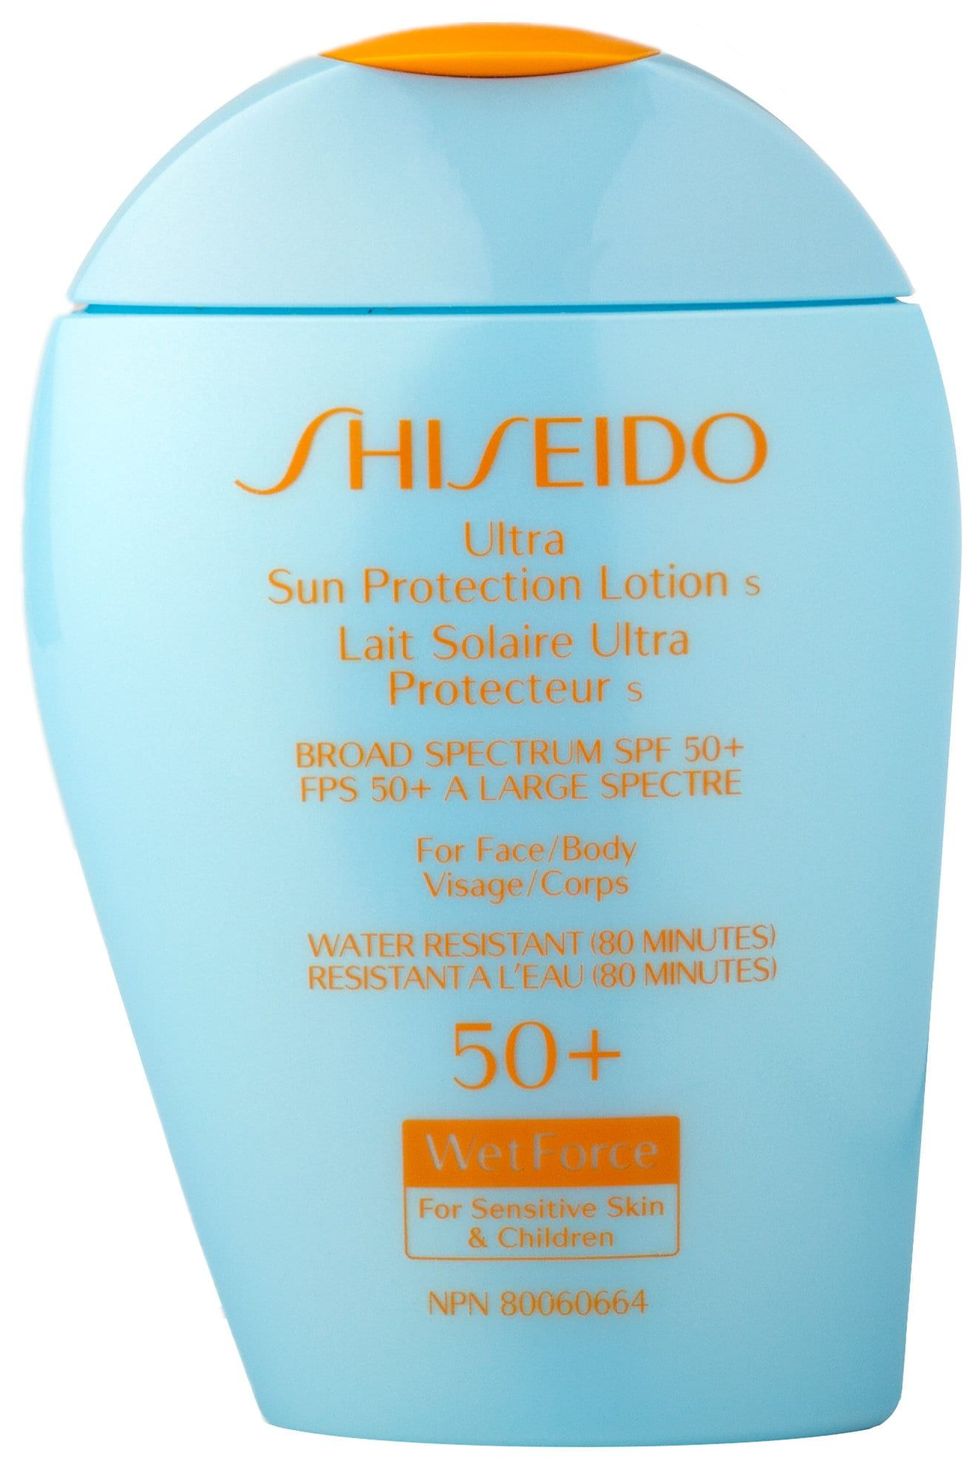 Ultimate Sun Protection Lotion SPF 50+